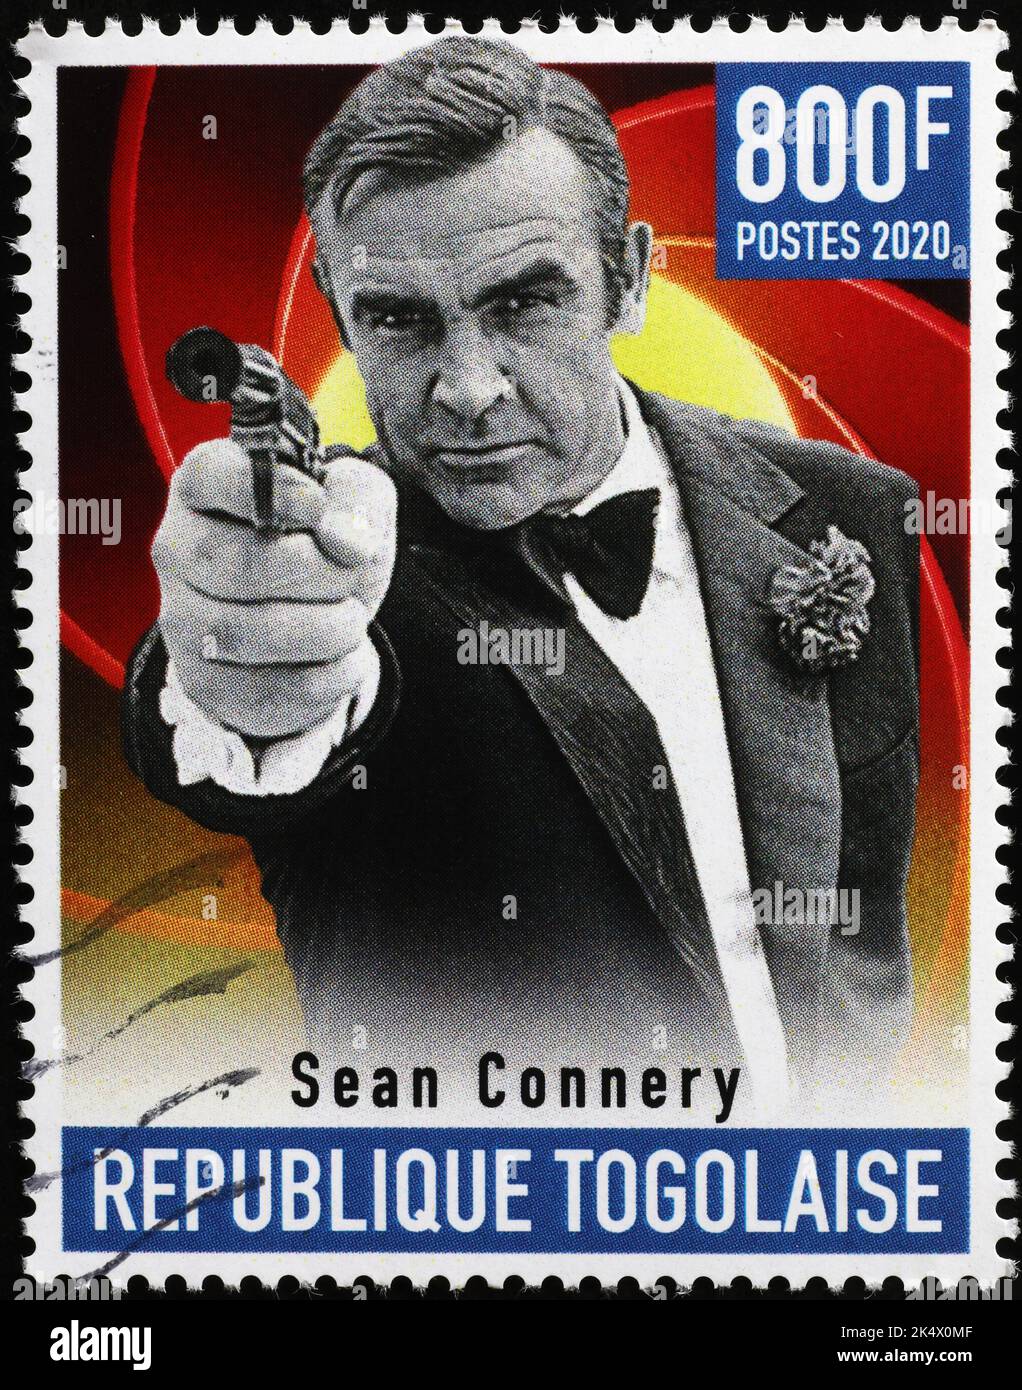 Sean Connery as James Bond 007 on african postage stamp Stock Photo